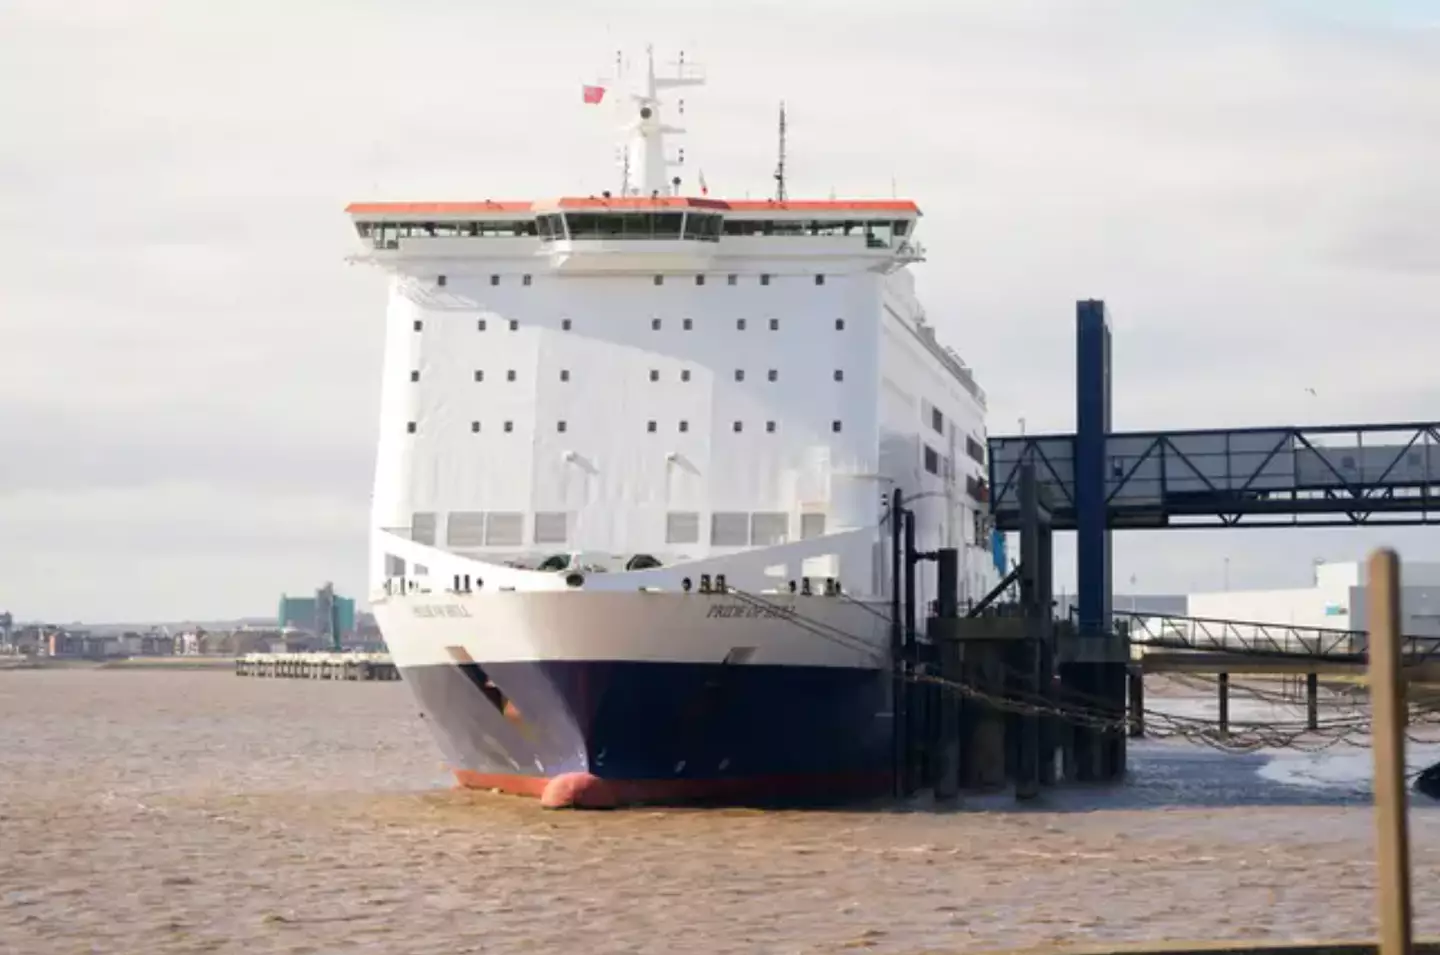 Ferry Pride of Hull.